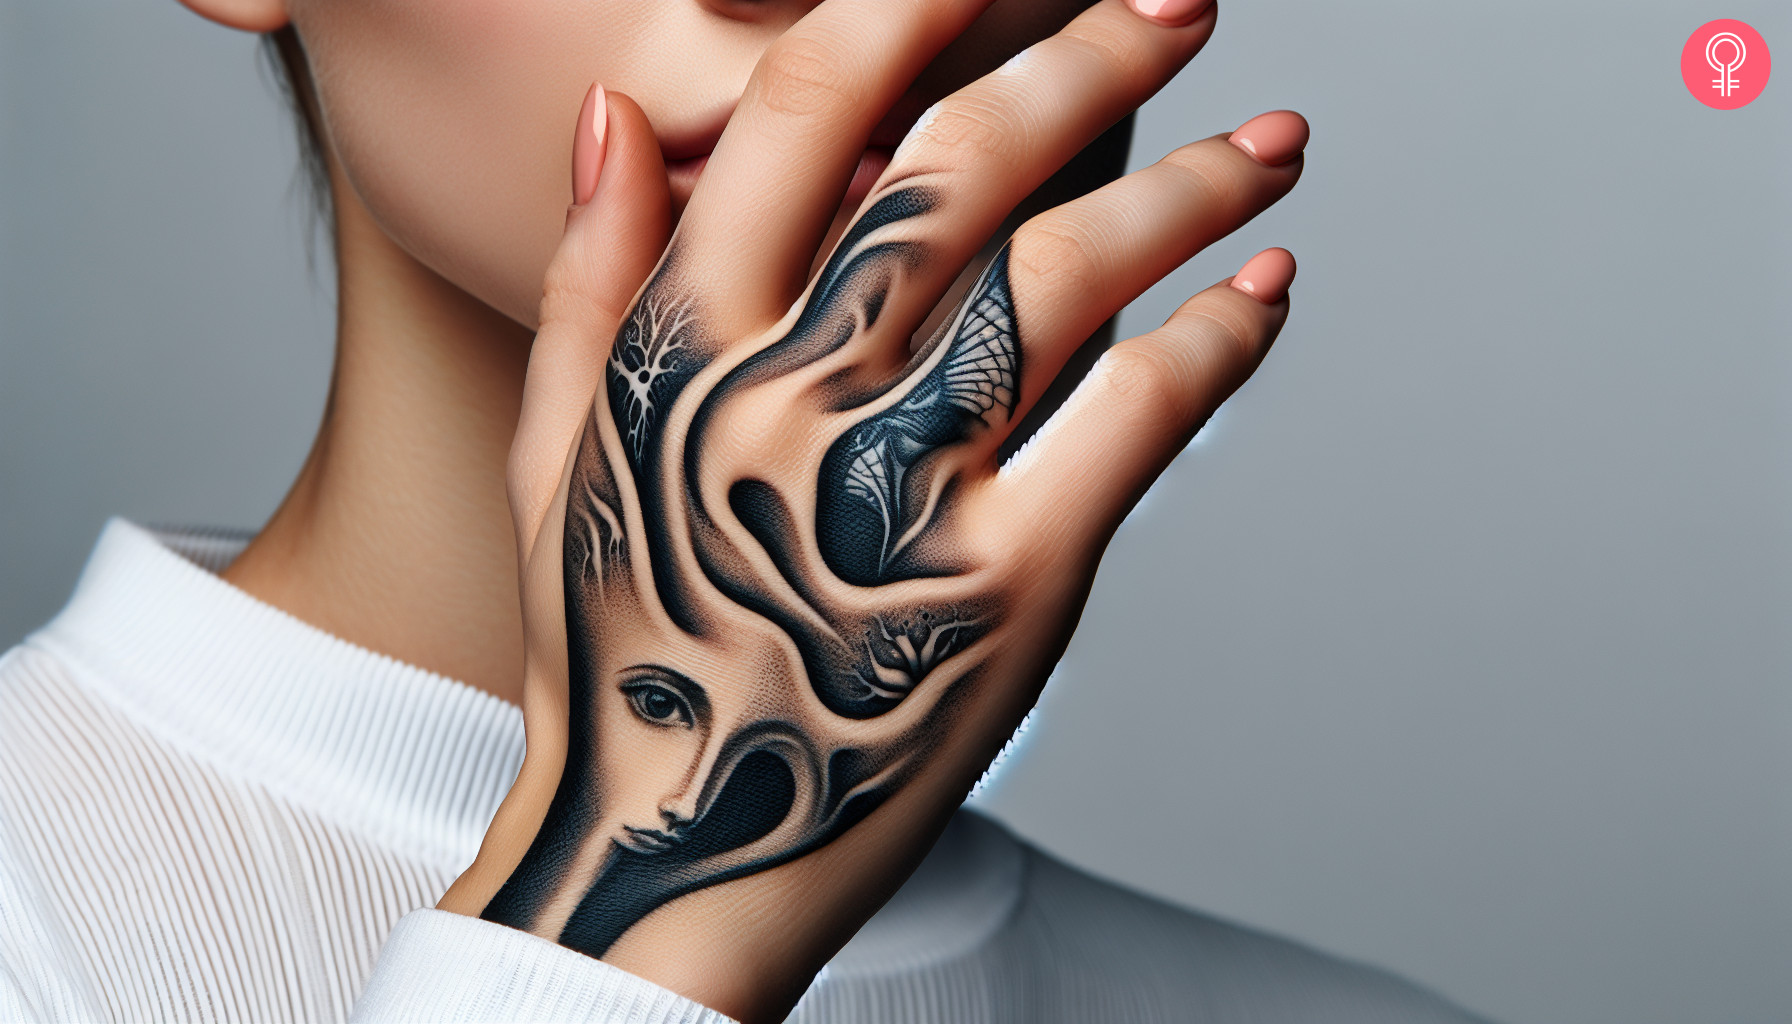 Woman with black and gray surrealism tattoo on her hand